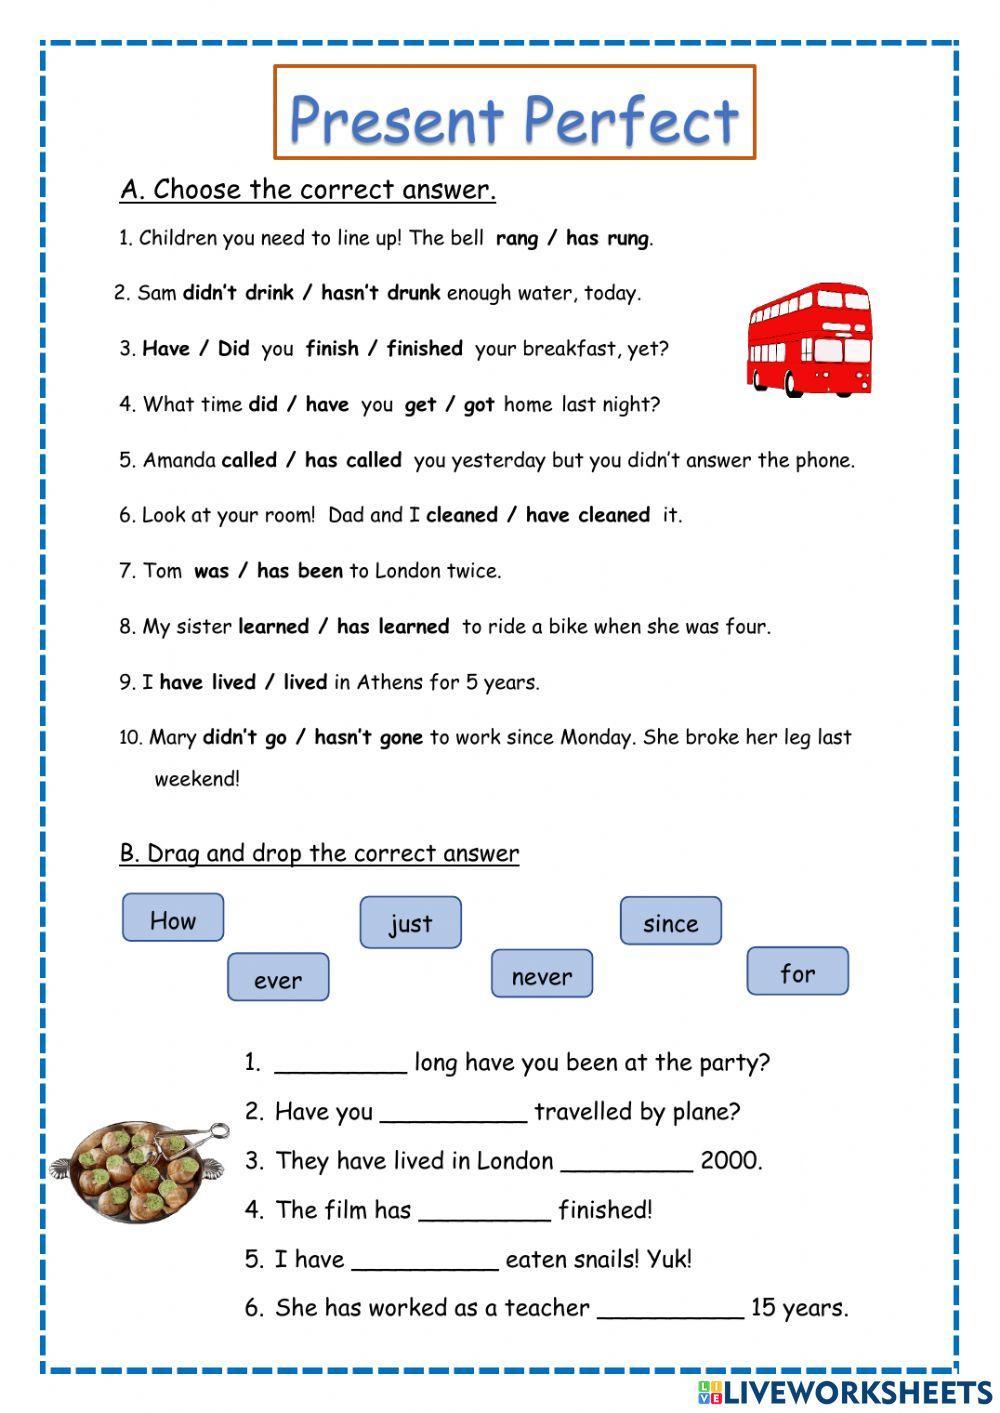 present-perfect-vs-past-simple-interactive-exercise-for-grade-6-live